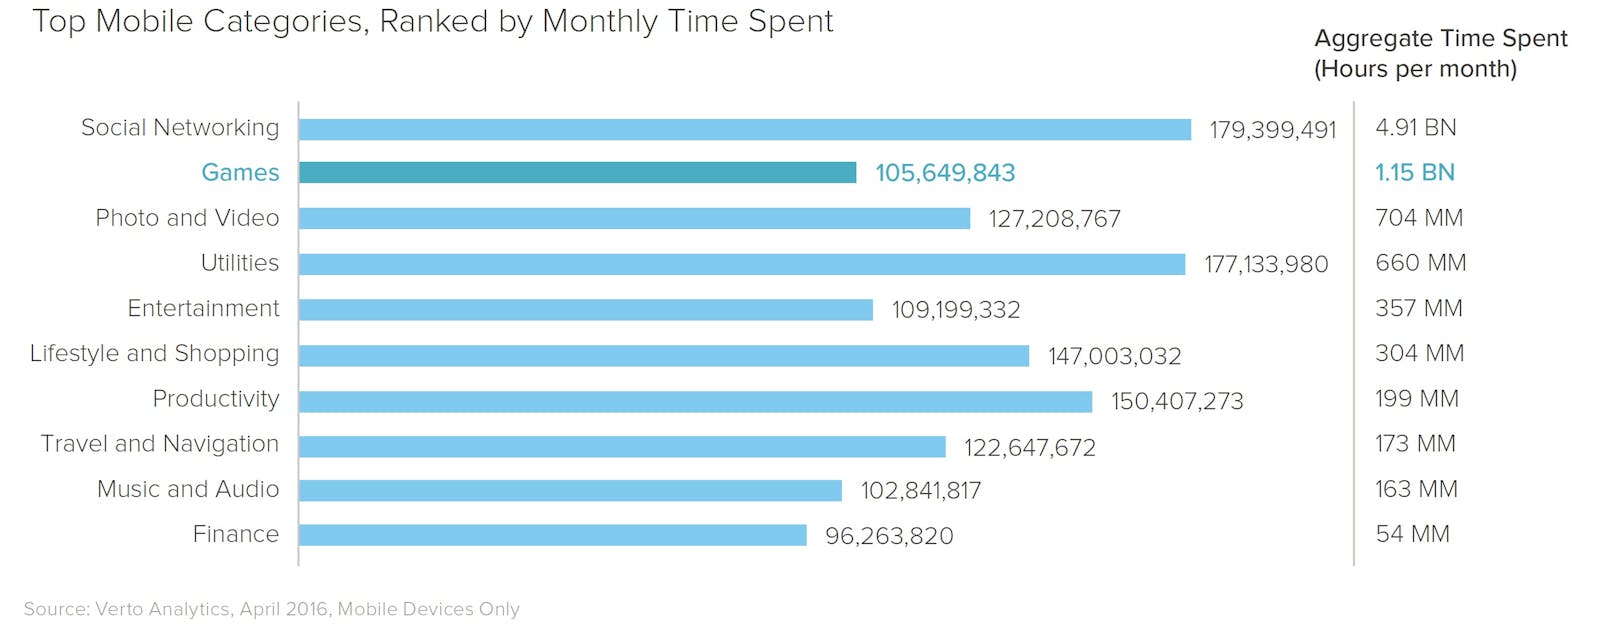 Top mobile categories ranked by monthly time spent